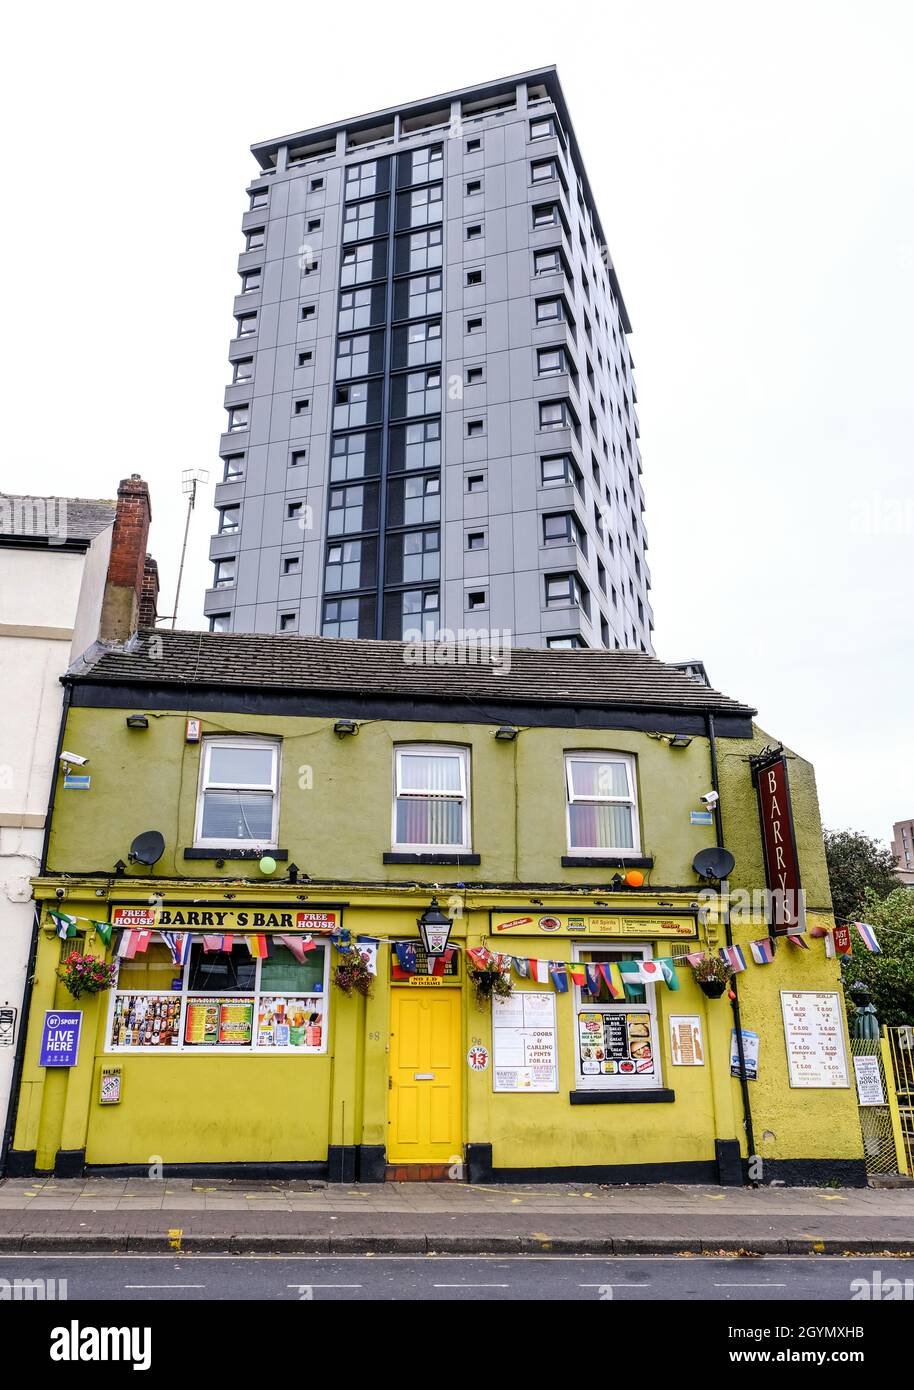 ABarry's Bar, a pub in a central area of Sheffield with a block of high rise flats towering above. Stock Photo